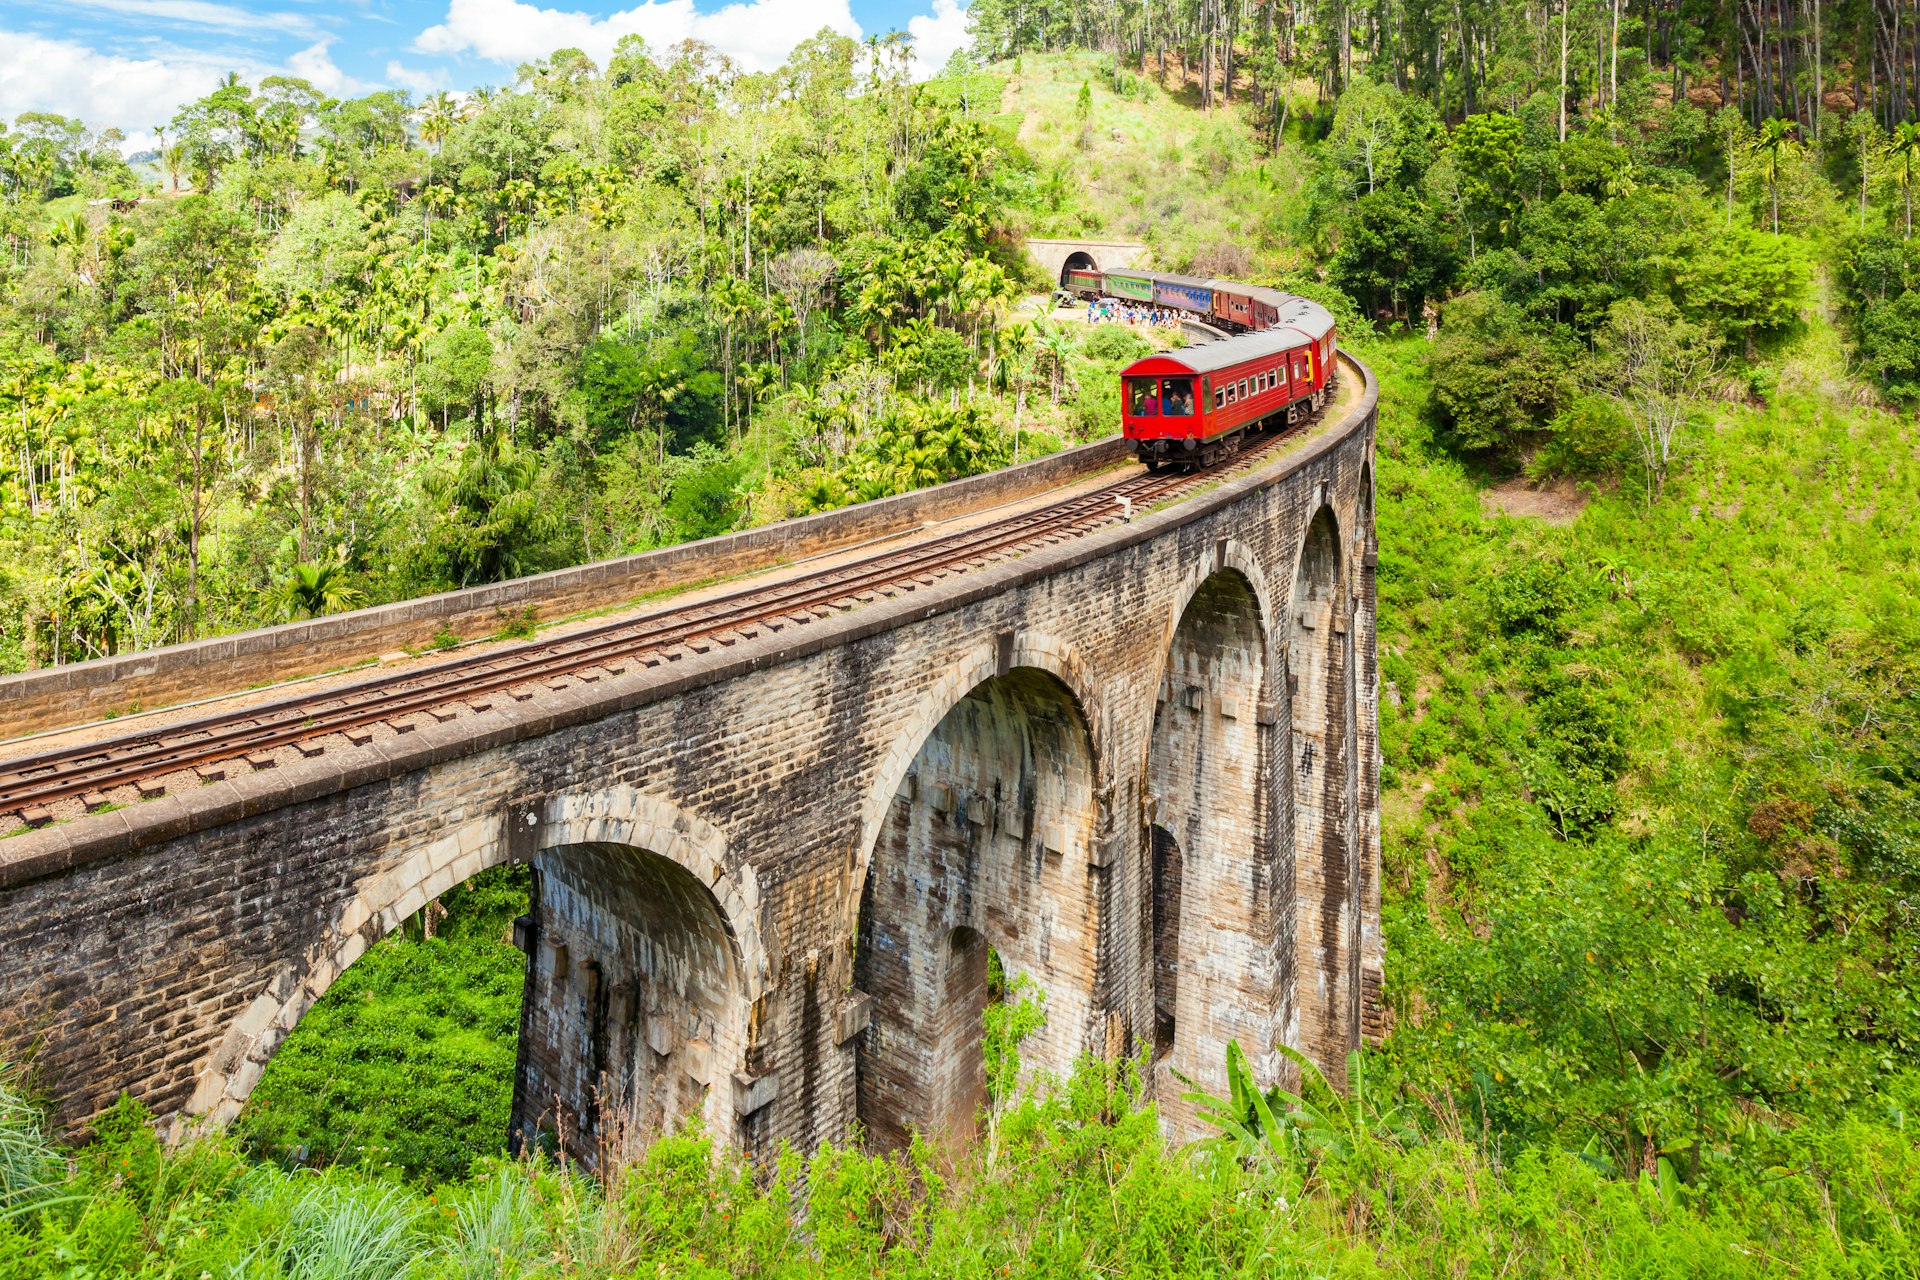 A red train crosses an ornate wooden bridge in the Sri Lankan Hill Country, near the town of Ella. The rolling hills in the background are covered in forest.